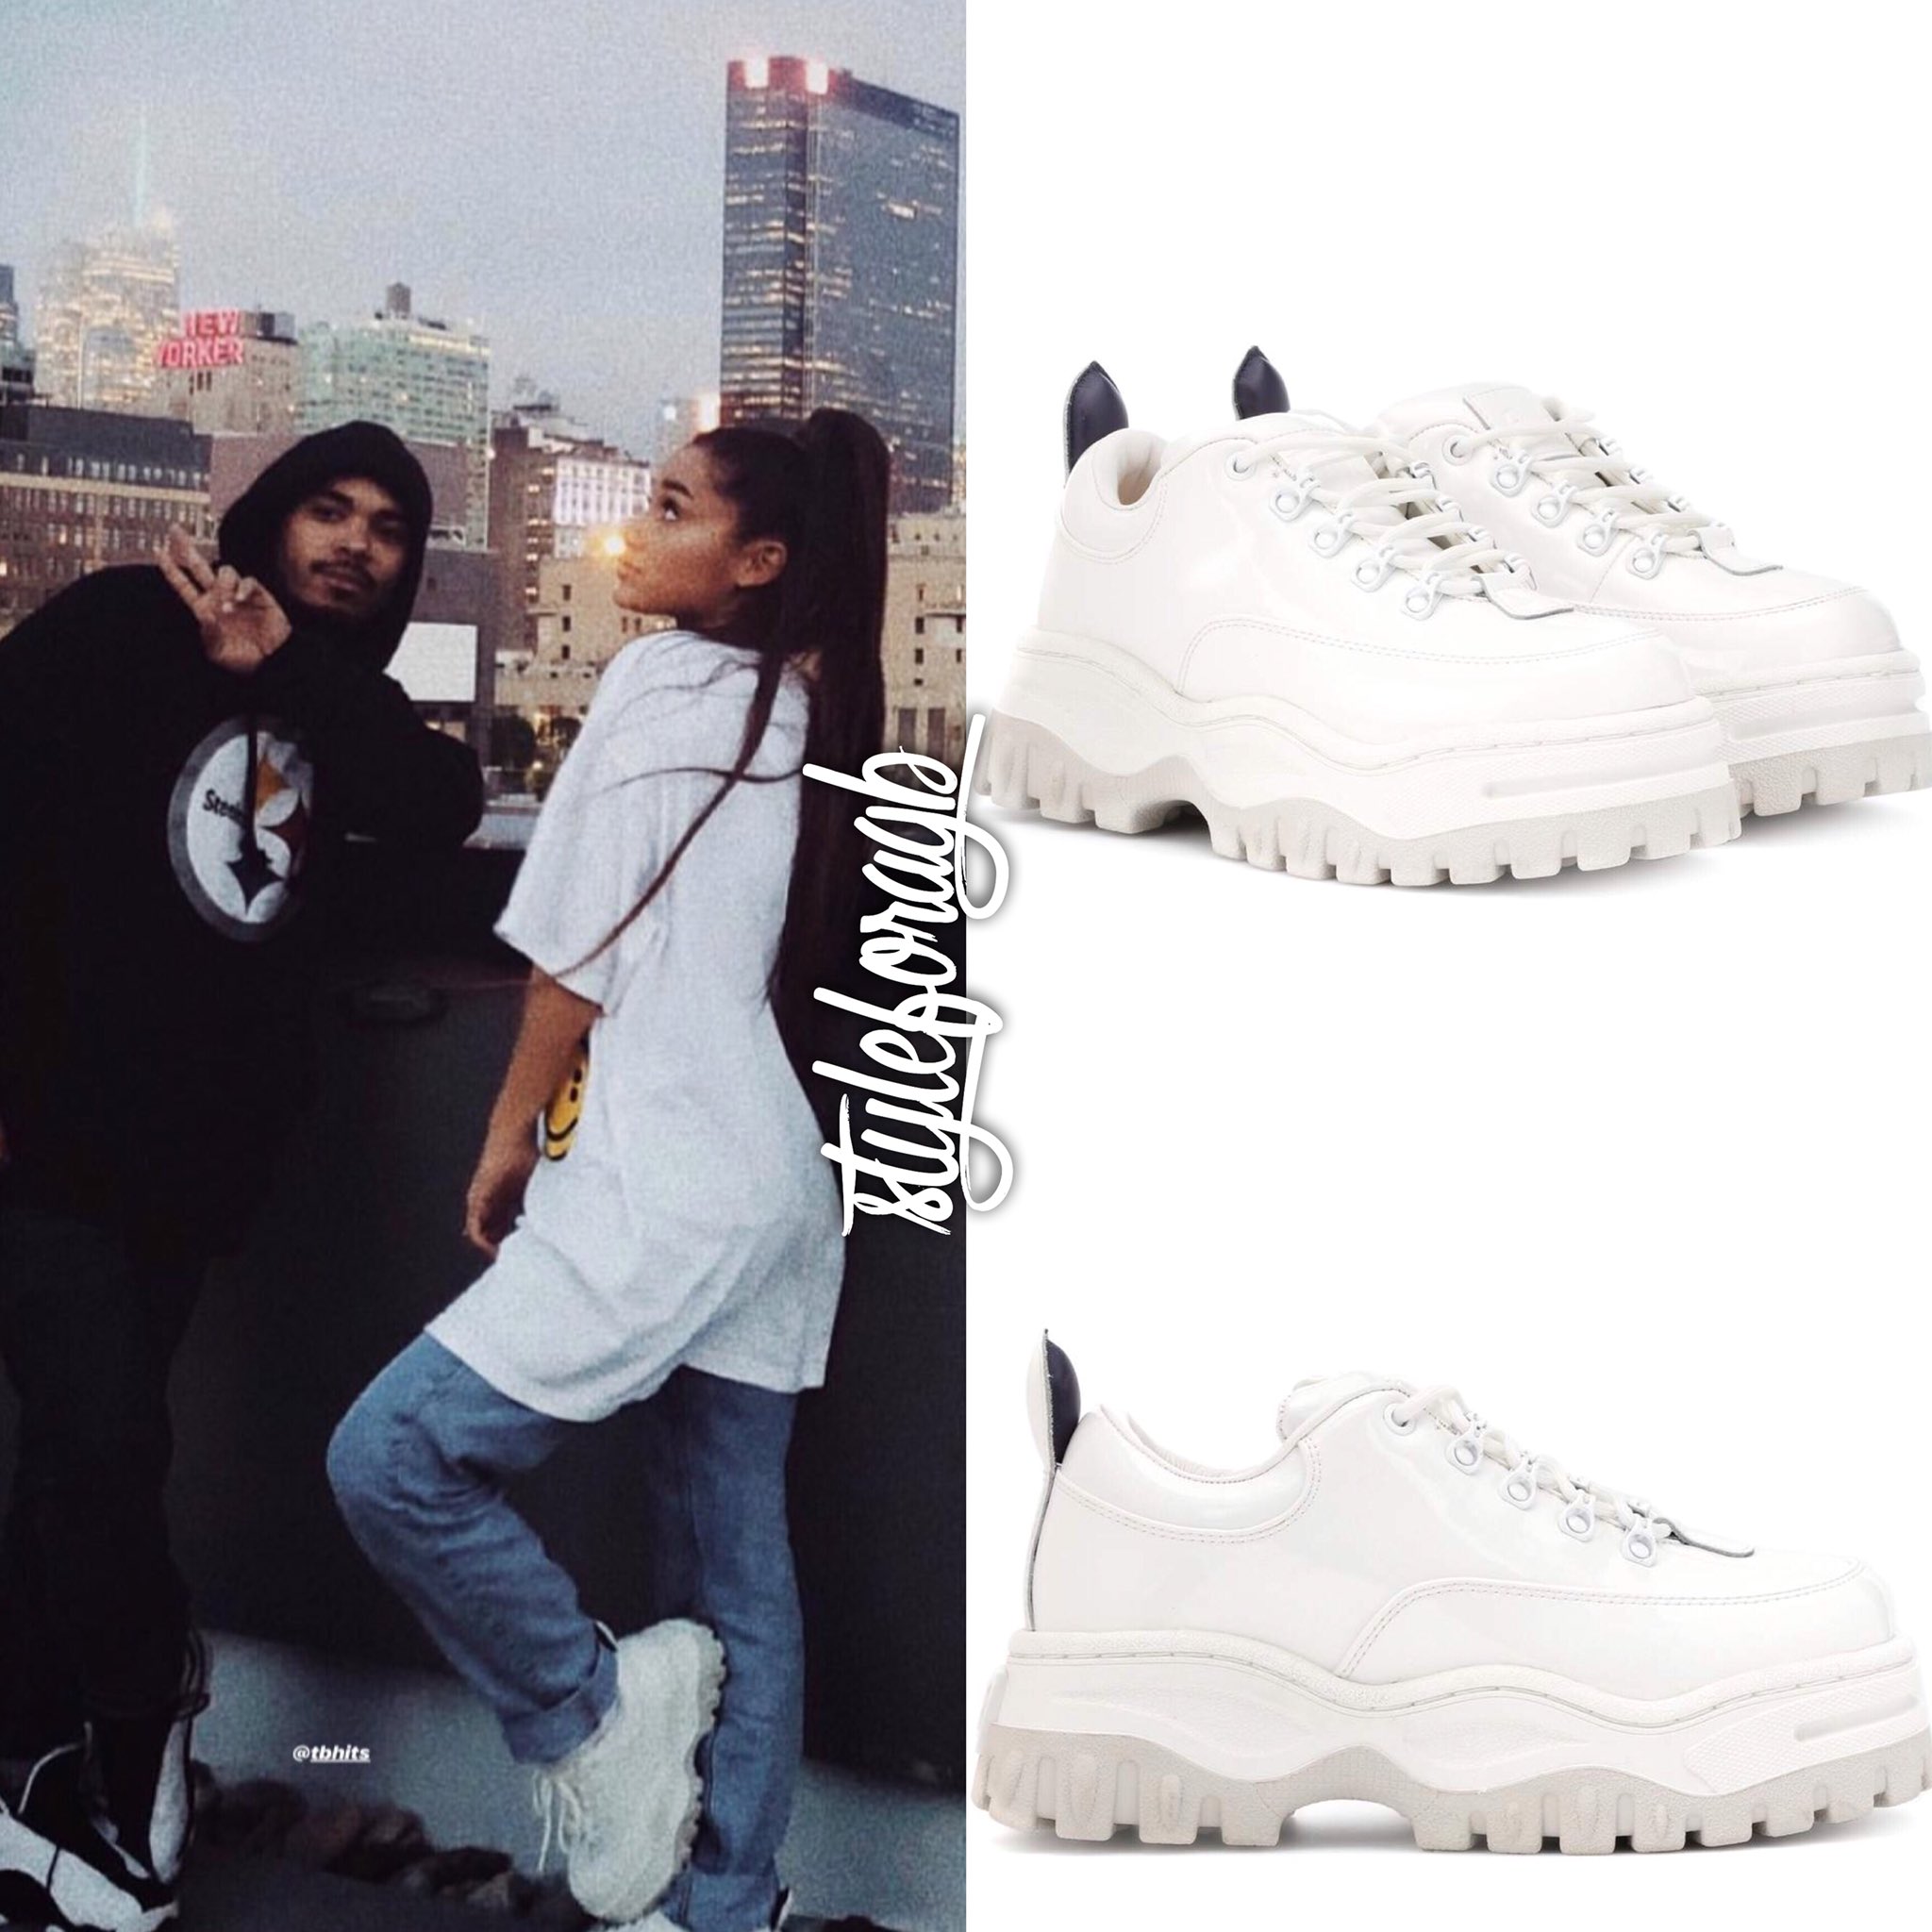 flugt notifikation Daisy Ariana Grande's closet on Twitter: "Ariana via Instagram stories | October  10th, 2018. - Wearing the Eytys Angel patent leather sneakers (£270)  https://t.co/FH8ZPfKFO5" / Twitter